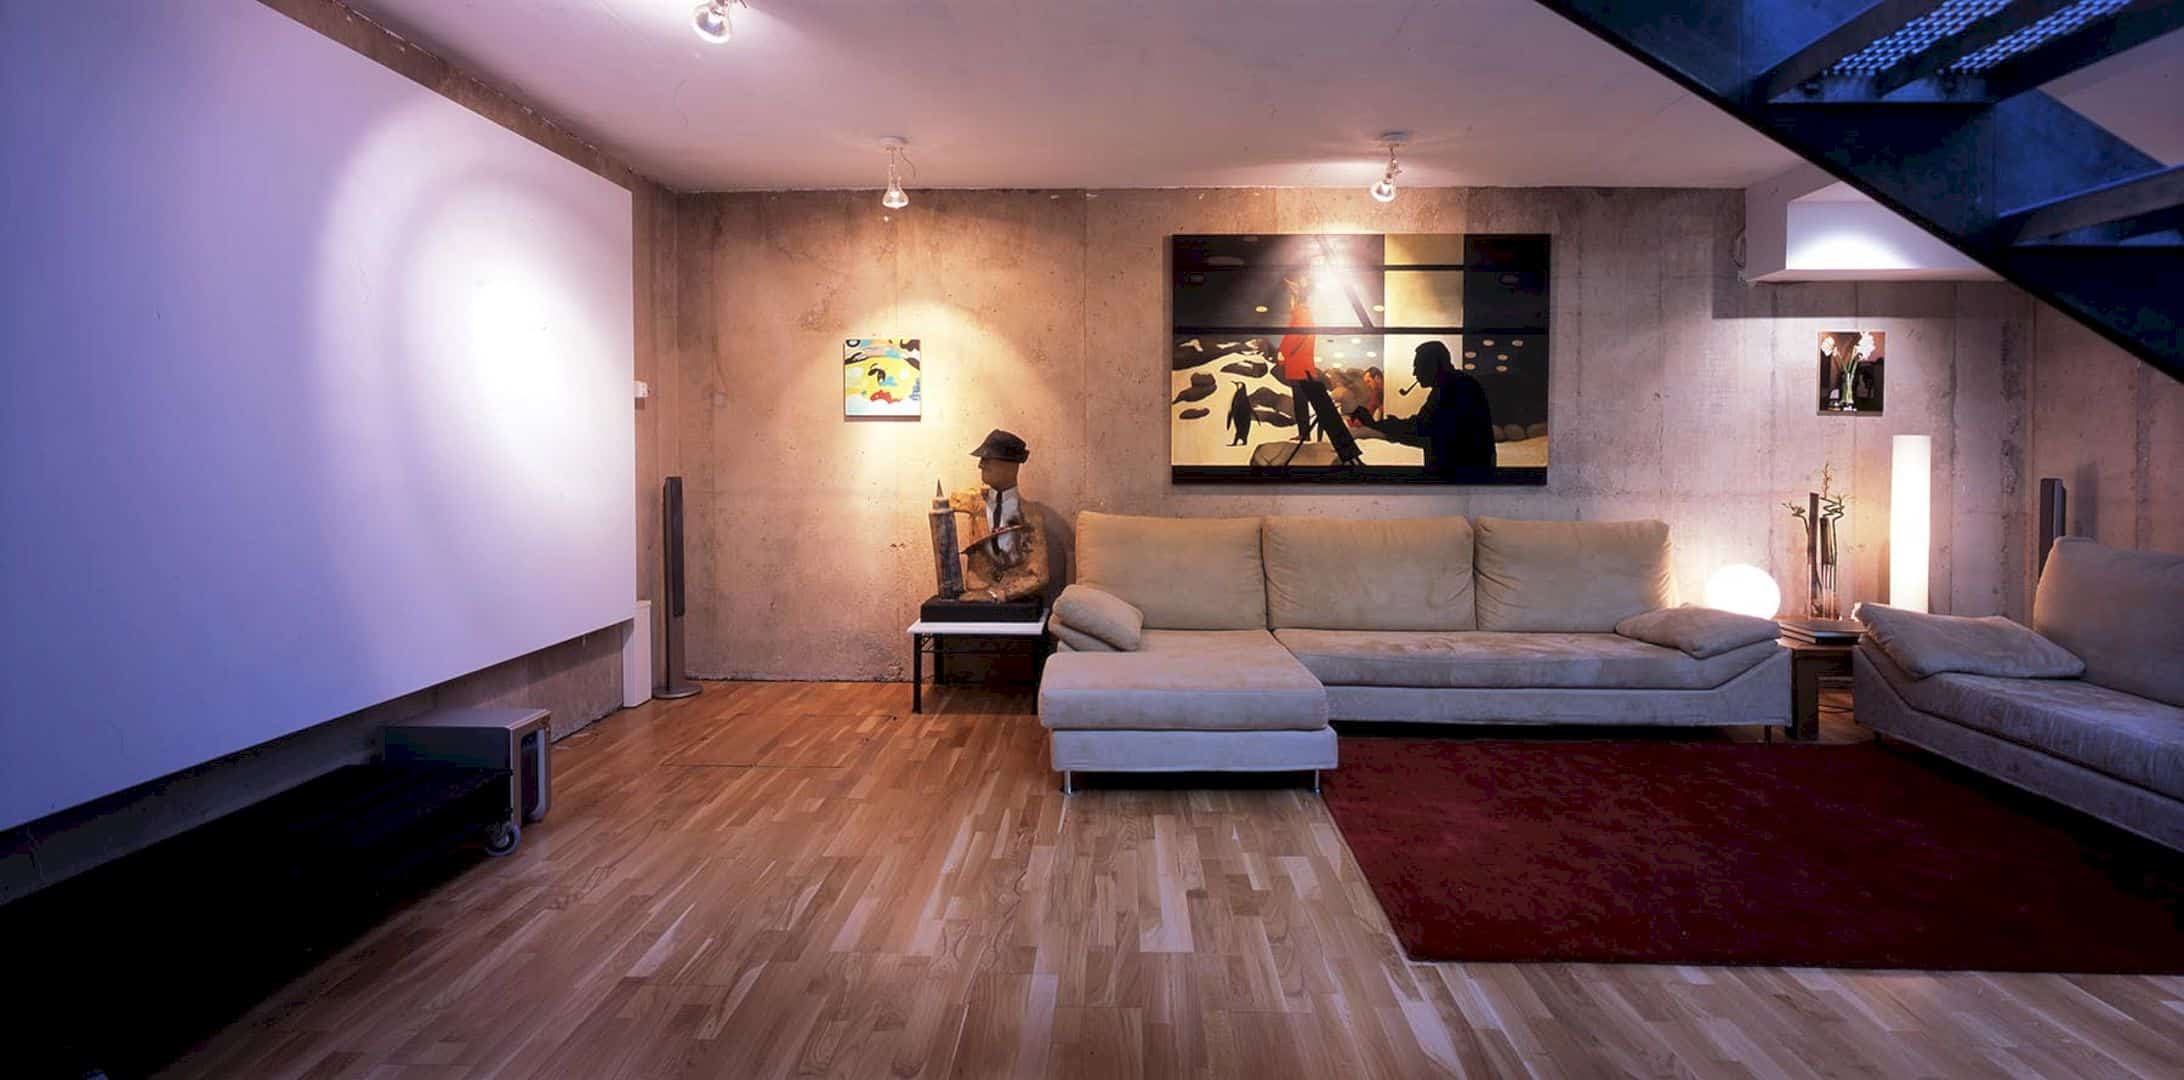 House And Studio For A Painter 6